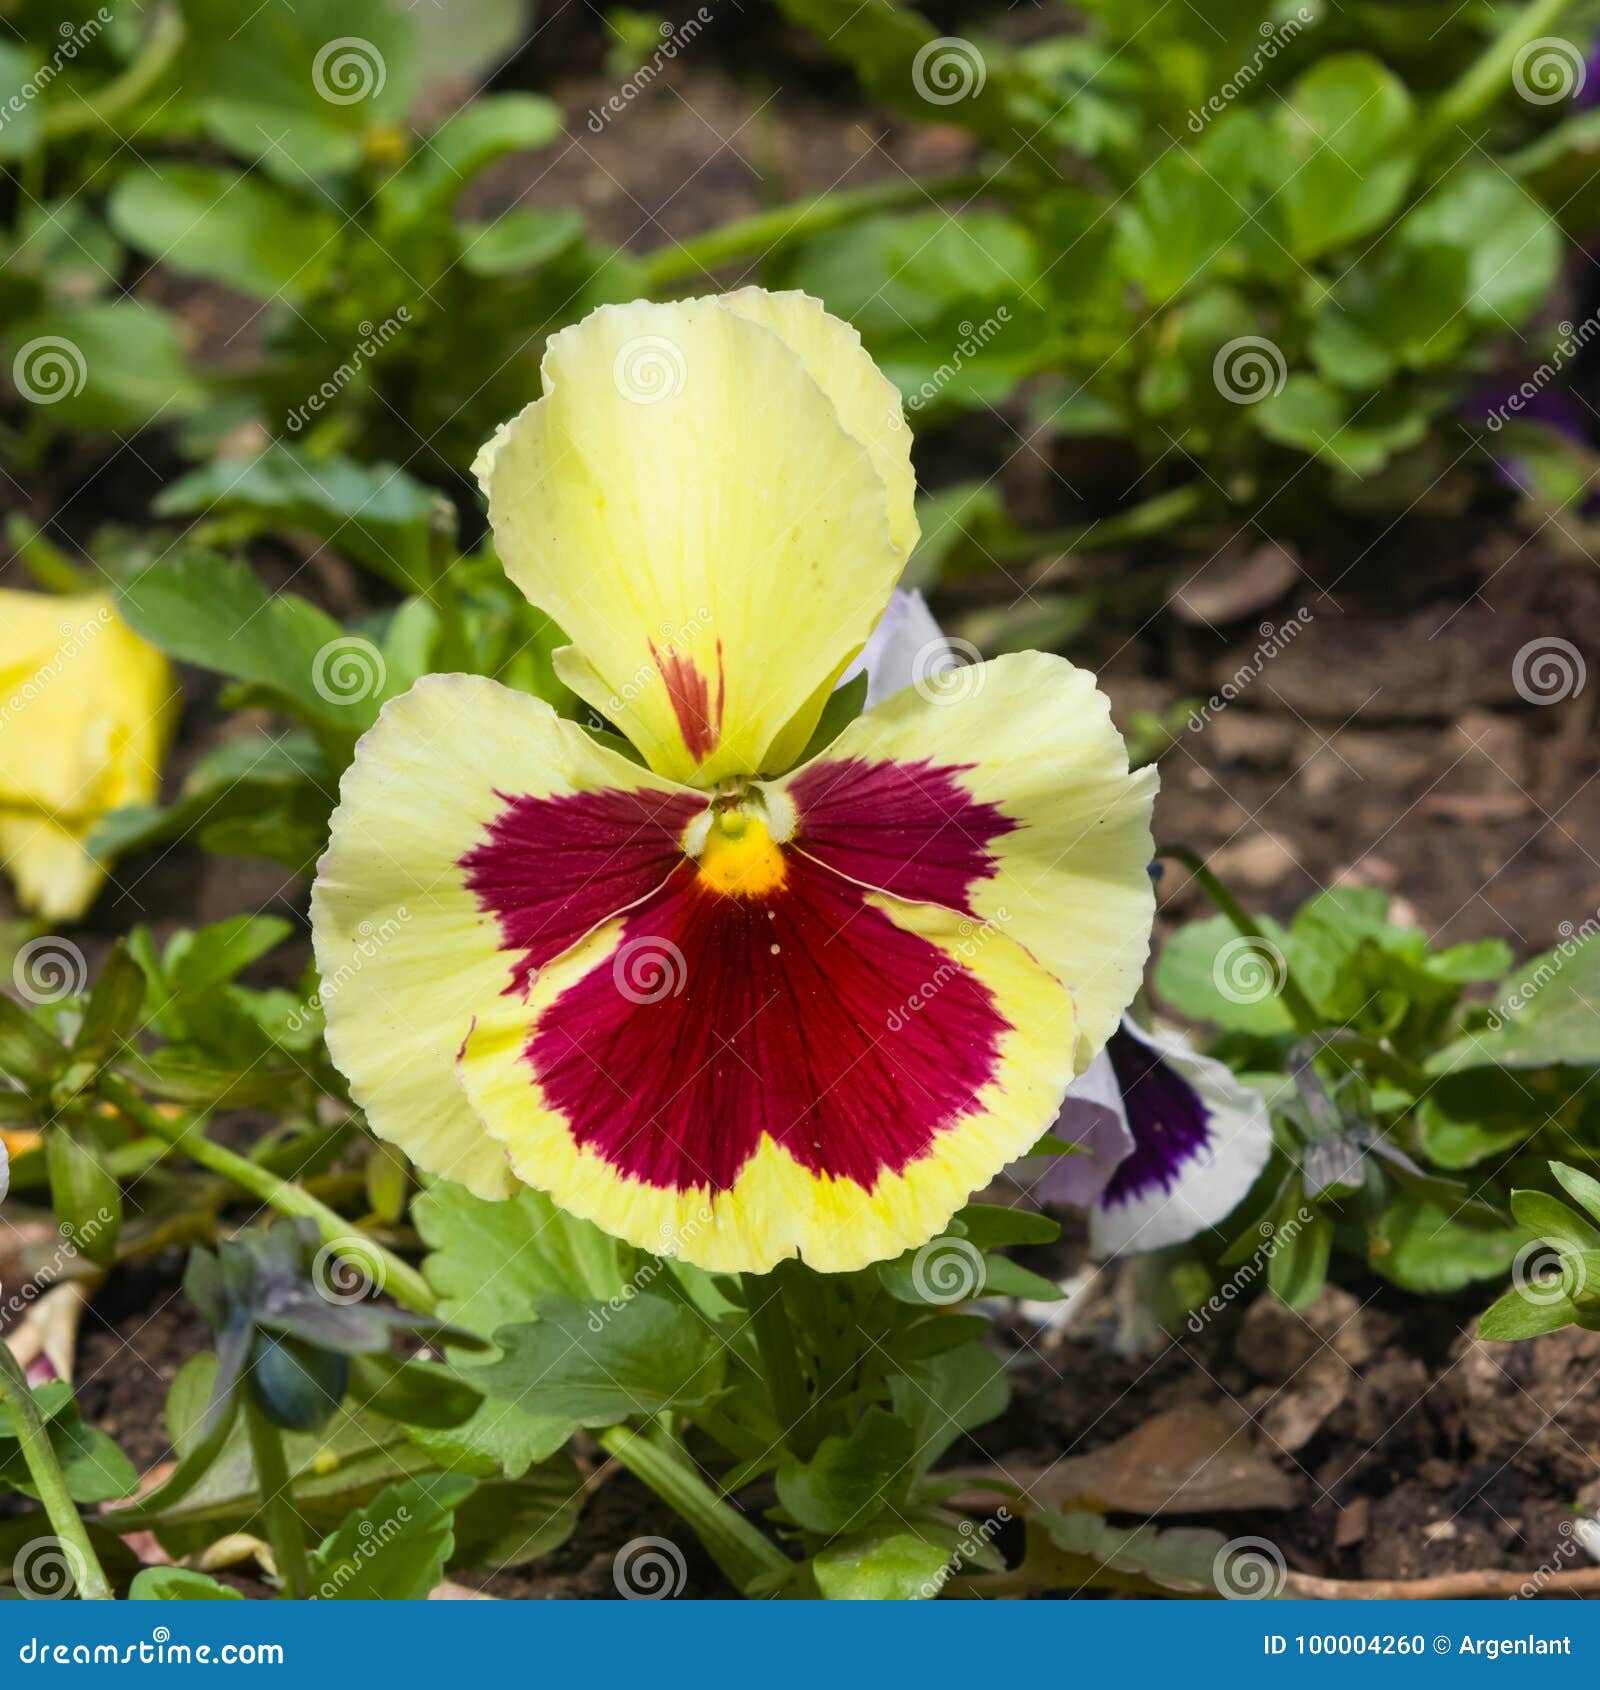 Yellow and Violet Viola Flower Detailed Macro, Selective Focus, Shallow ...